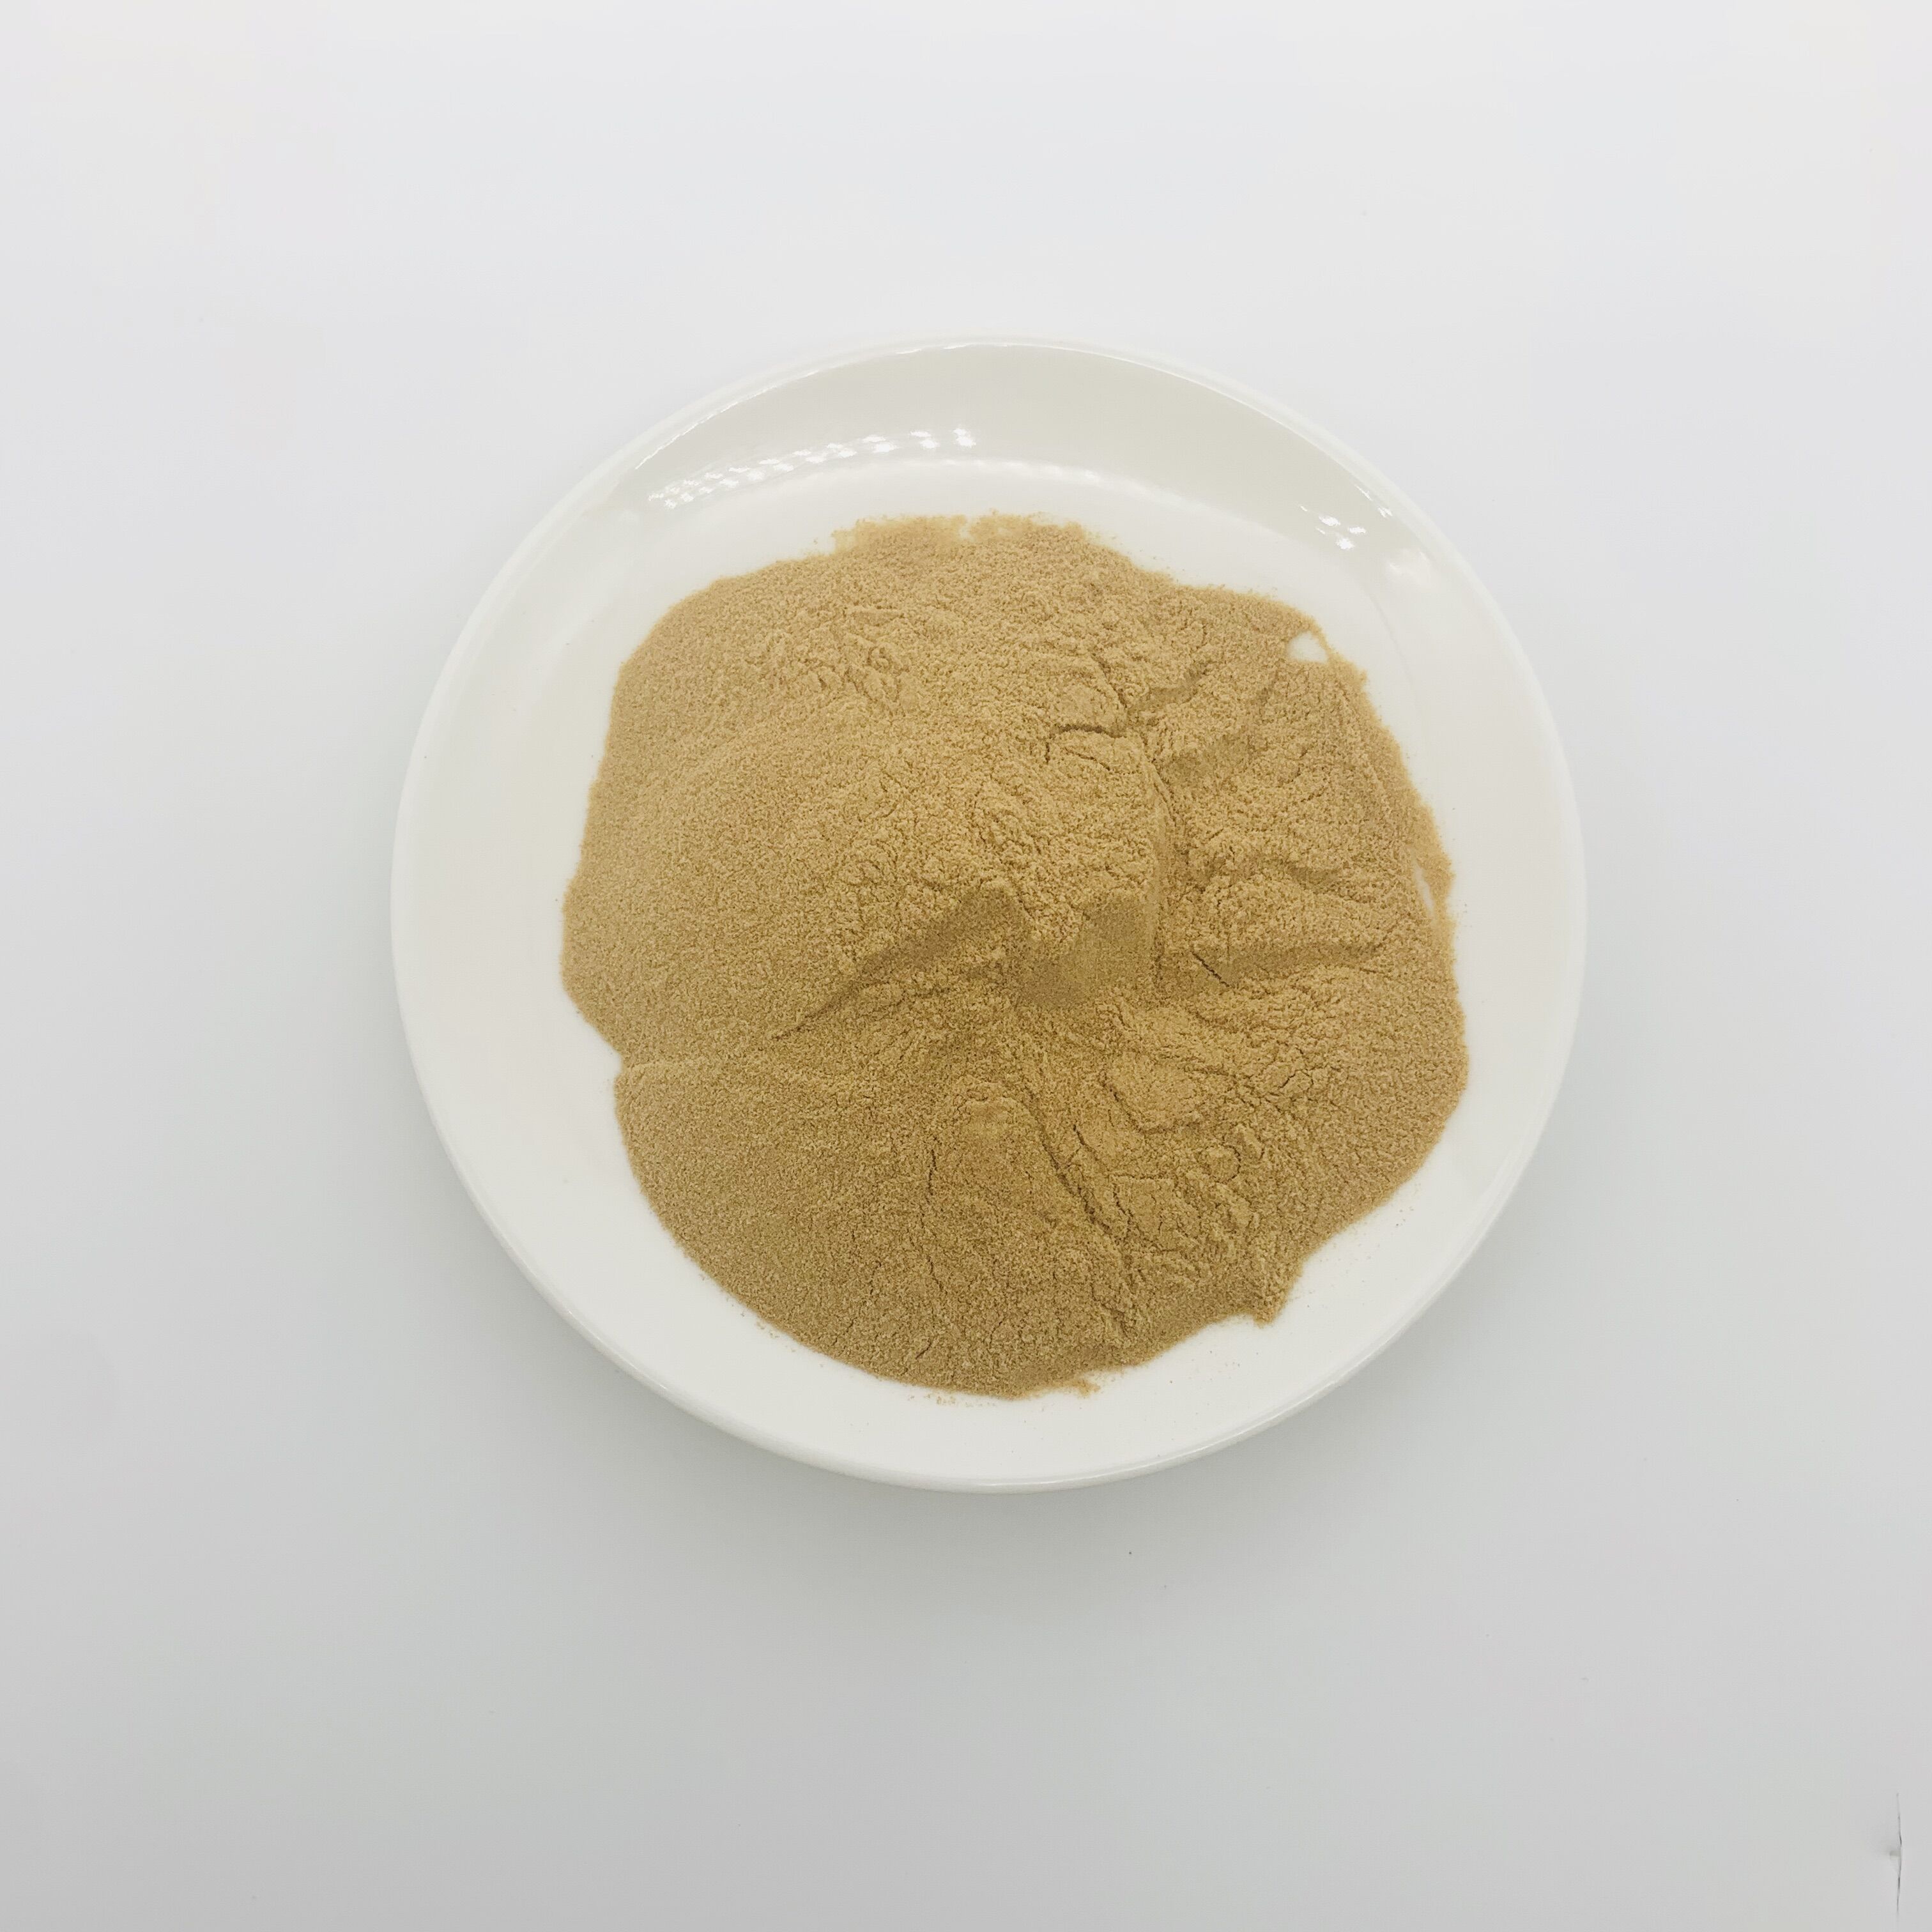 Coix Seed Extract Powder